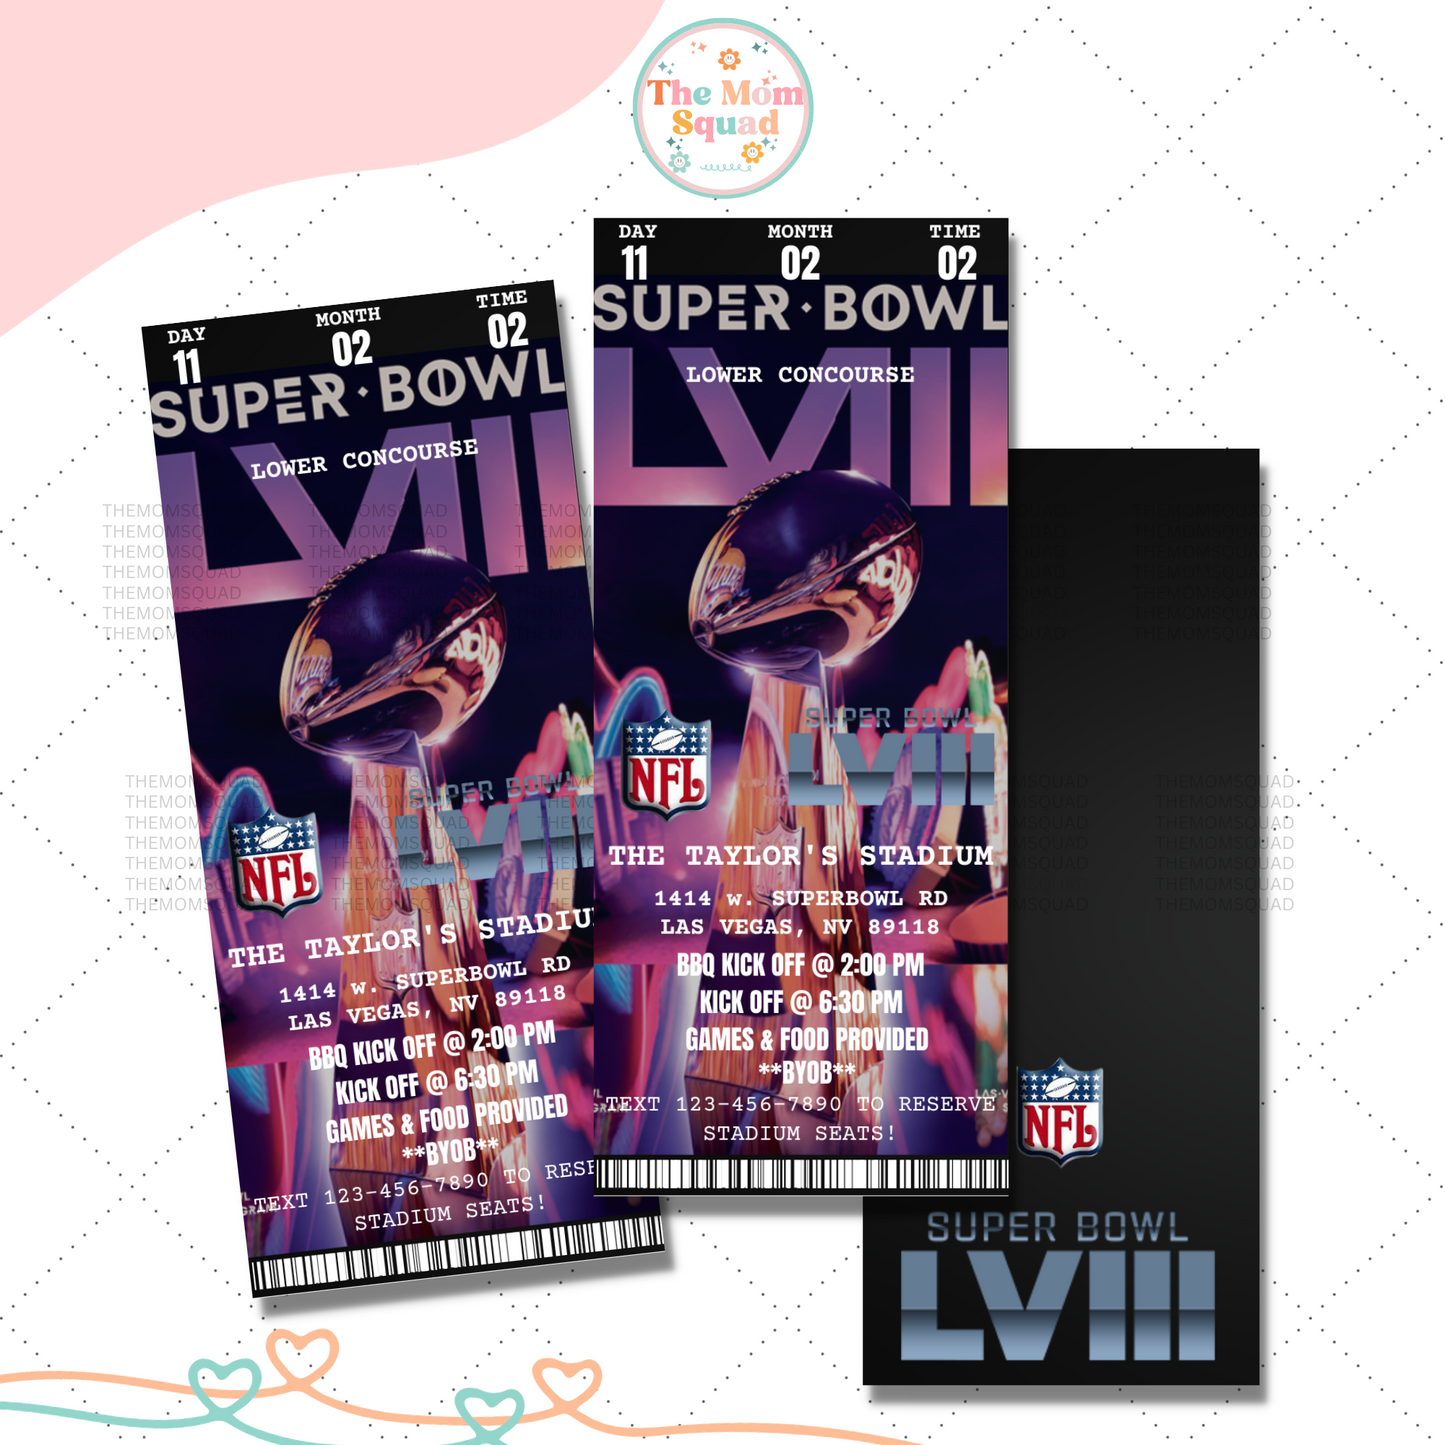 Ultimate Super Bowl Watch Party Experience: Exclusive Ticket Invitation for an Unforgettable Game Day Celebration!